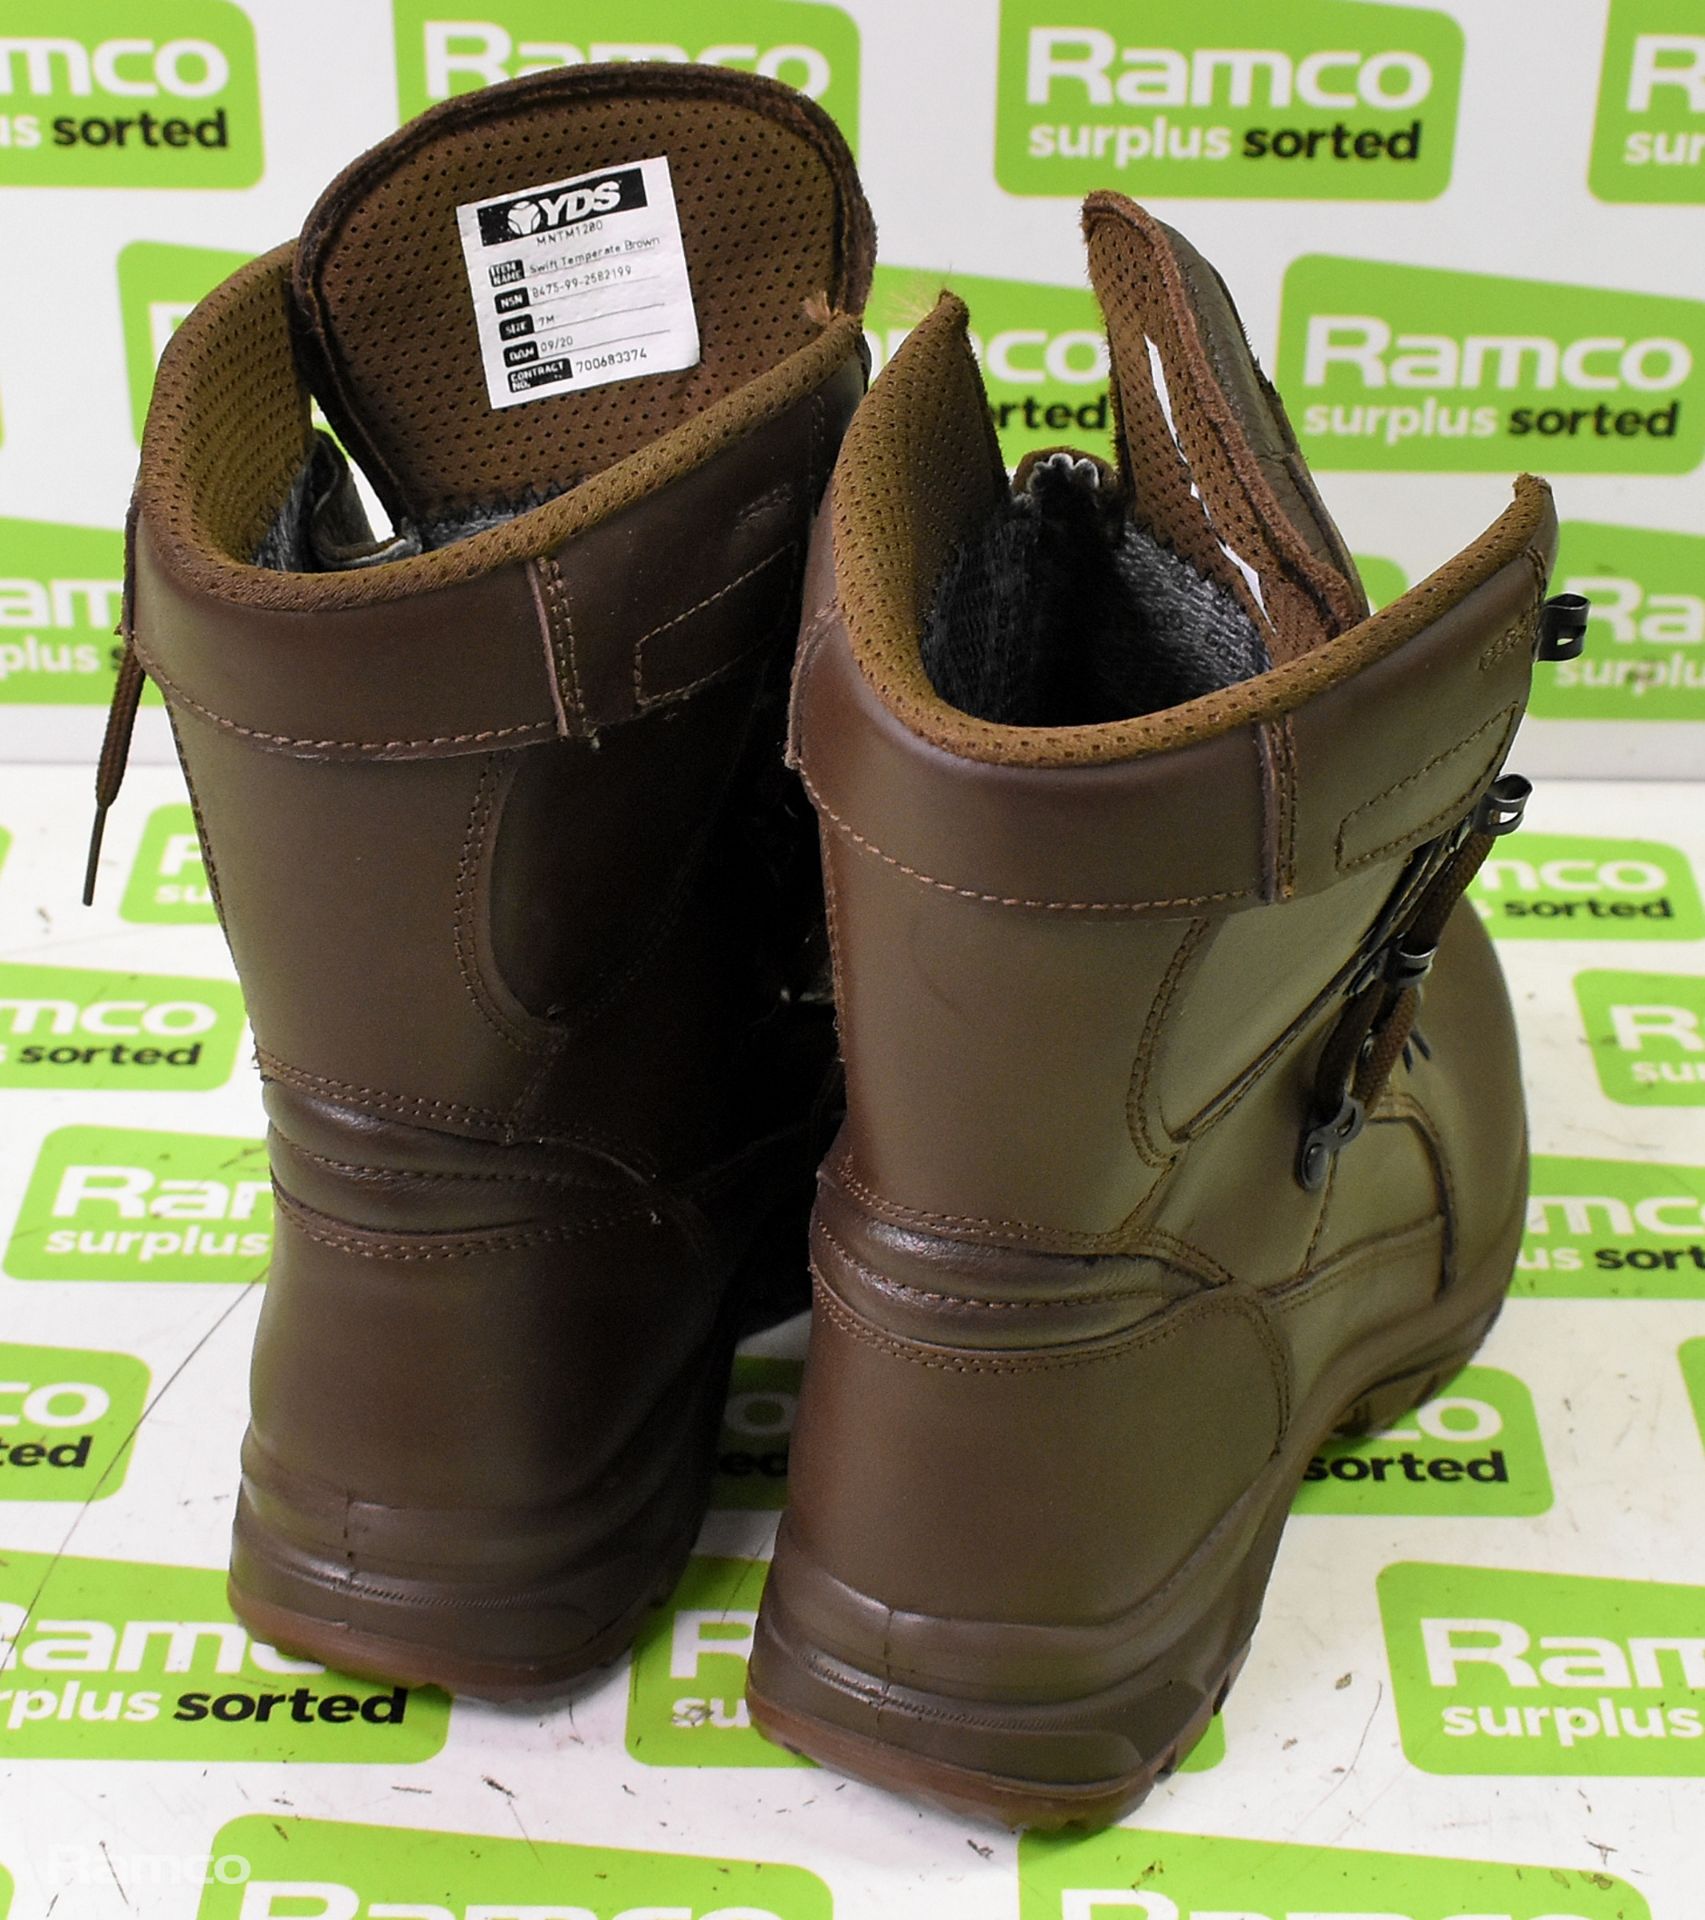 YDS swift temperate boots with Gore-tex lining - Brown - 7M - Image 3 of 5